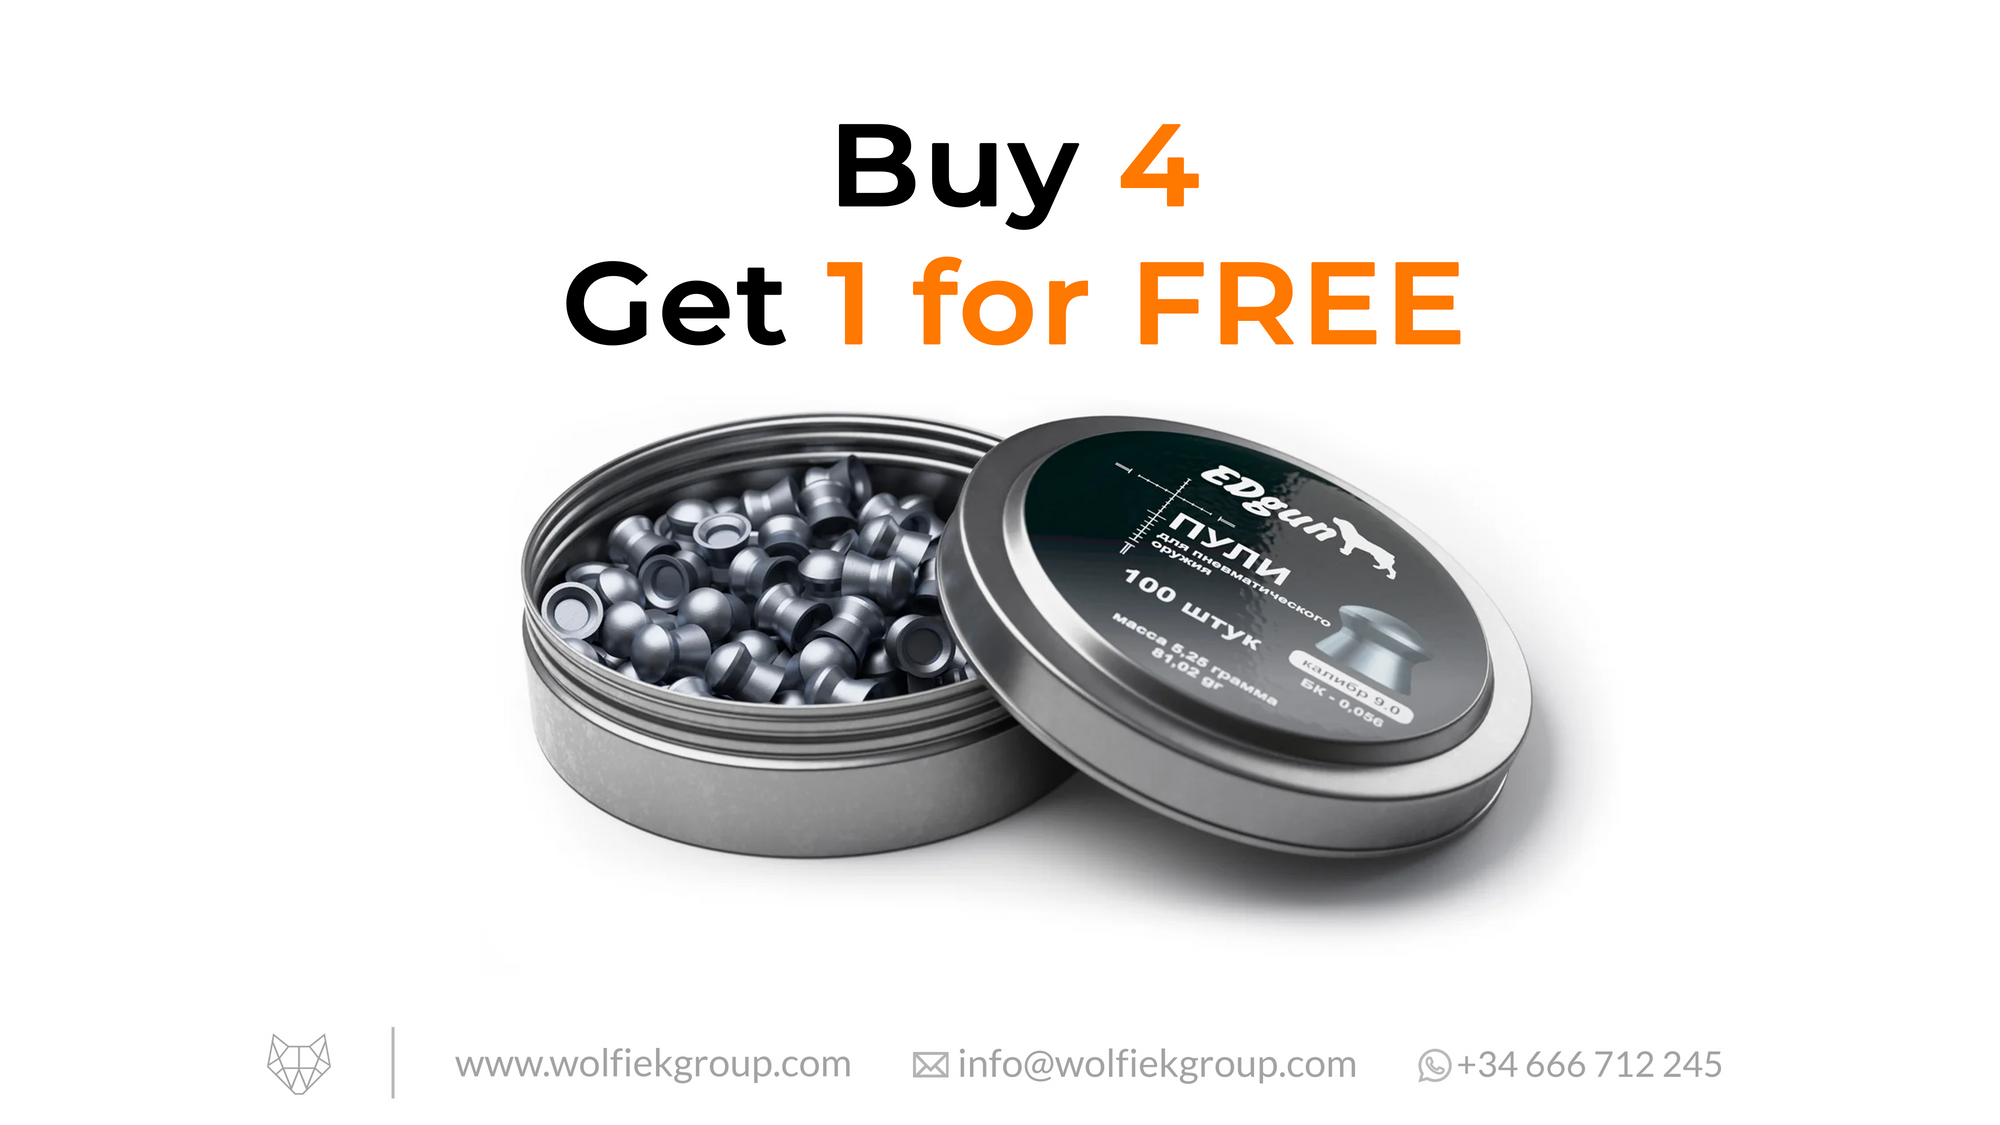 EDgun Premium Pellets Cal .35 (9mm) Weight 5.25g (81,01gr) with text buy 4 get 1 for free